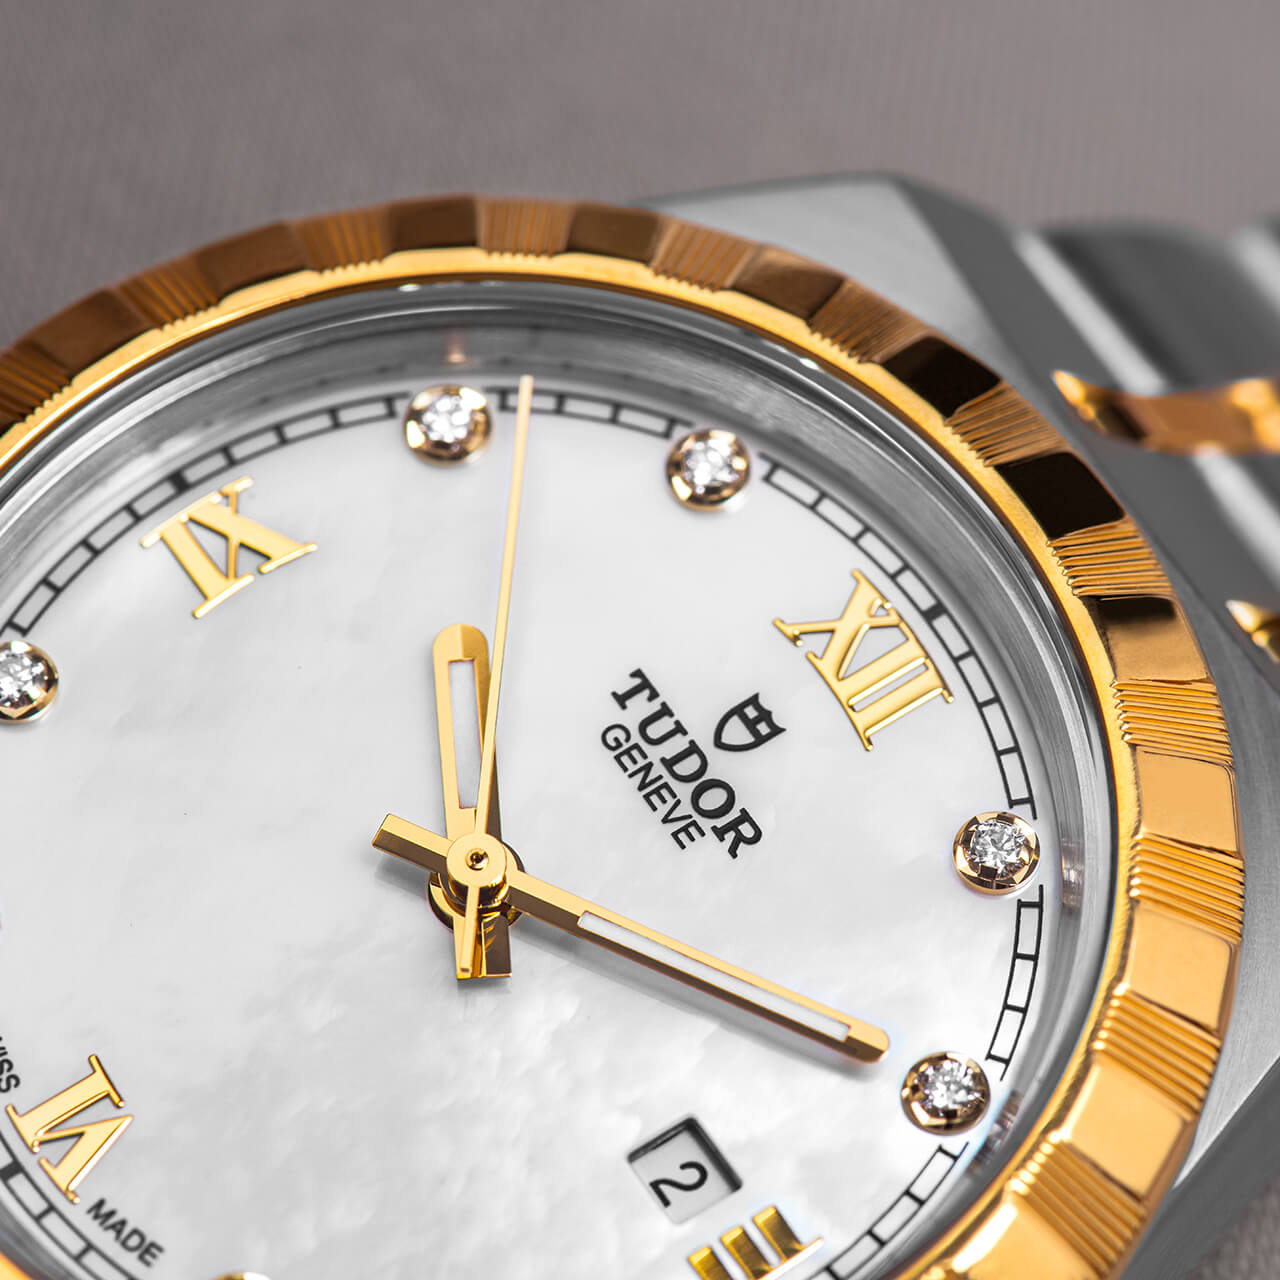 A gold and silver watch with a mother of pearl dial.